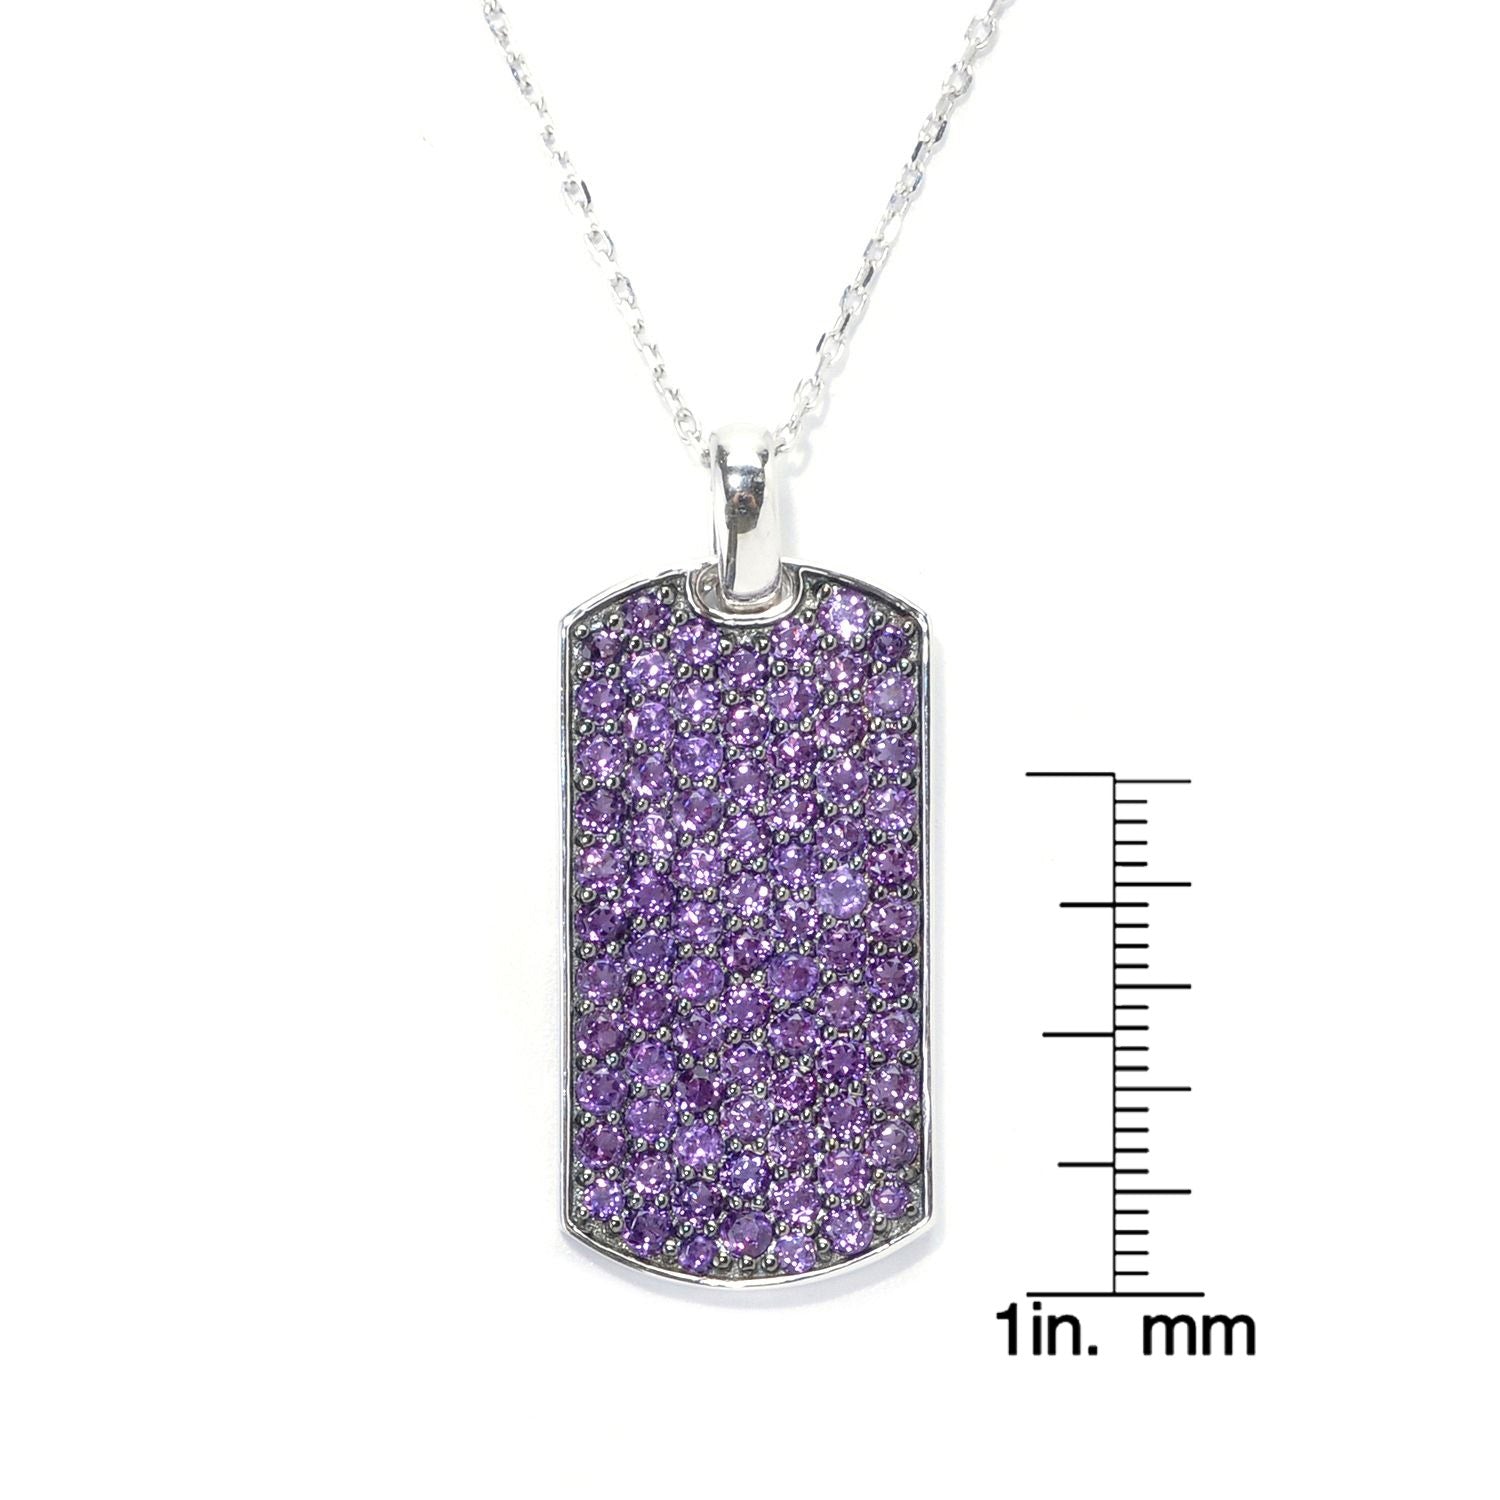 Sterling Silver Pave Amethyst Necklace with Chain and Cord - Pinctore